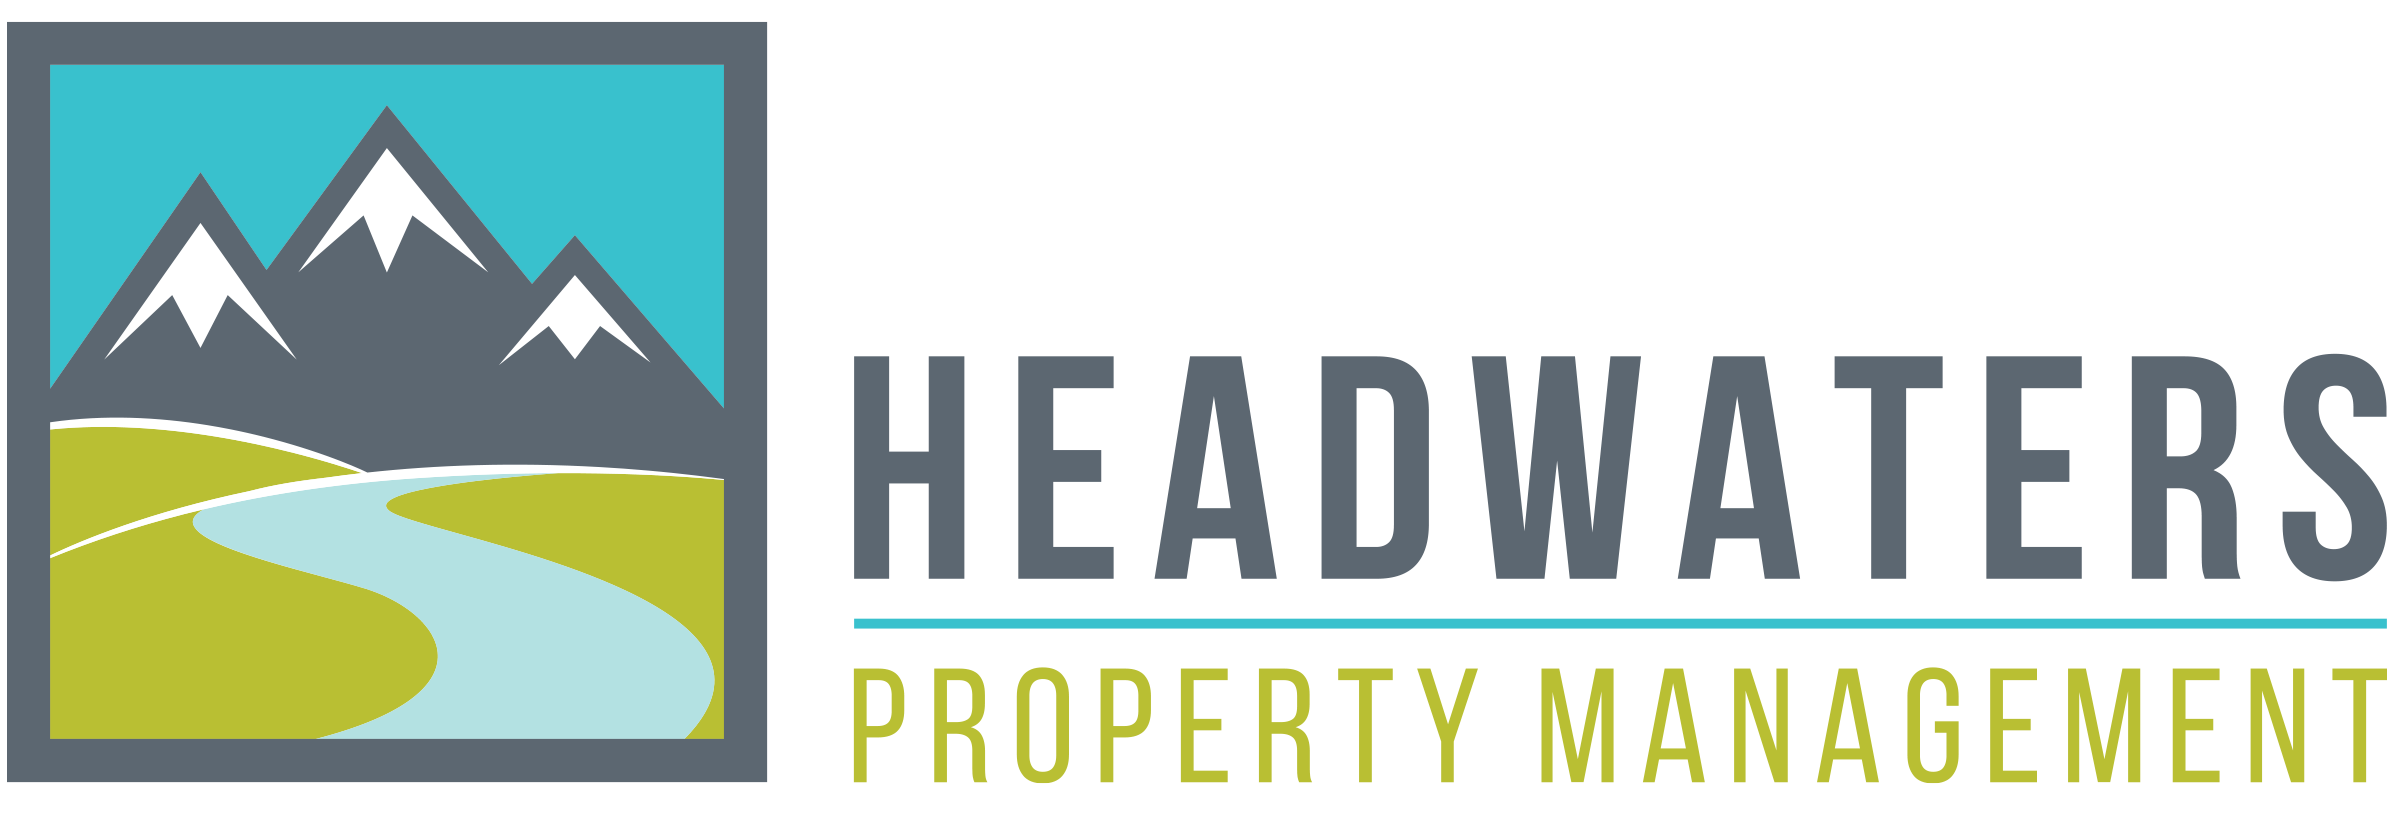 Headwaters Property Management